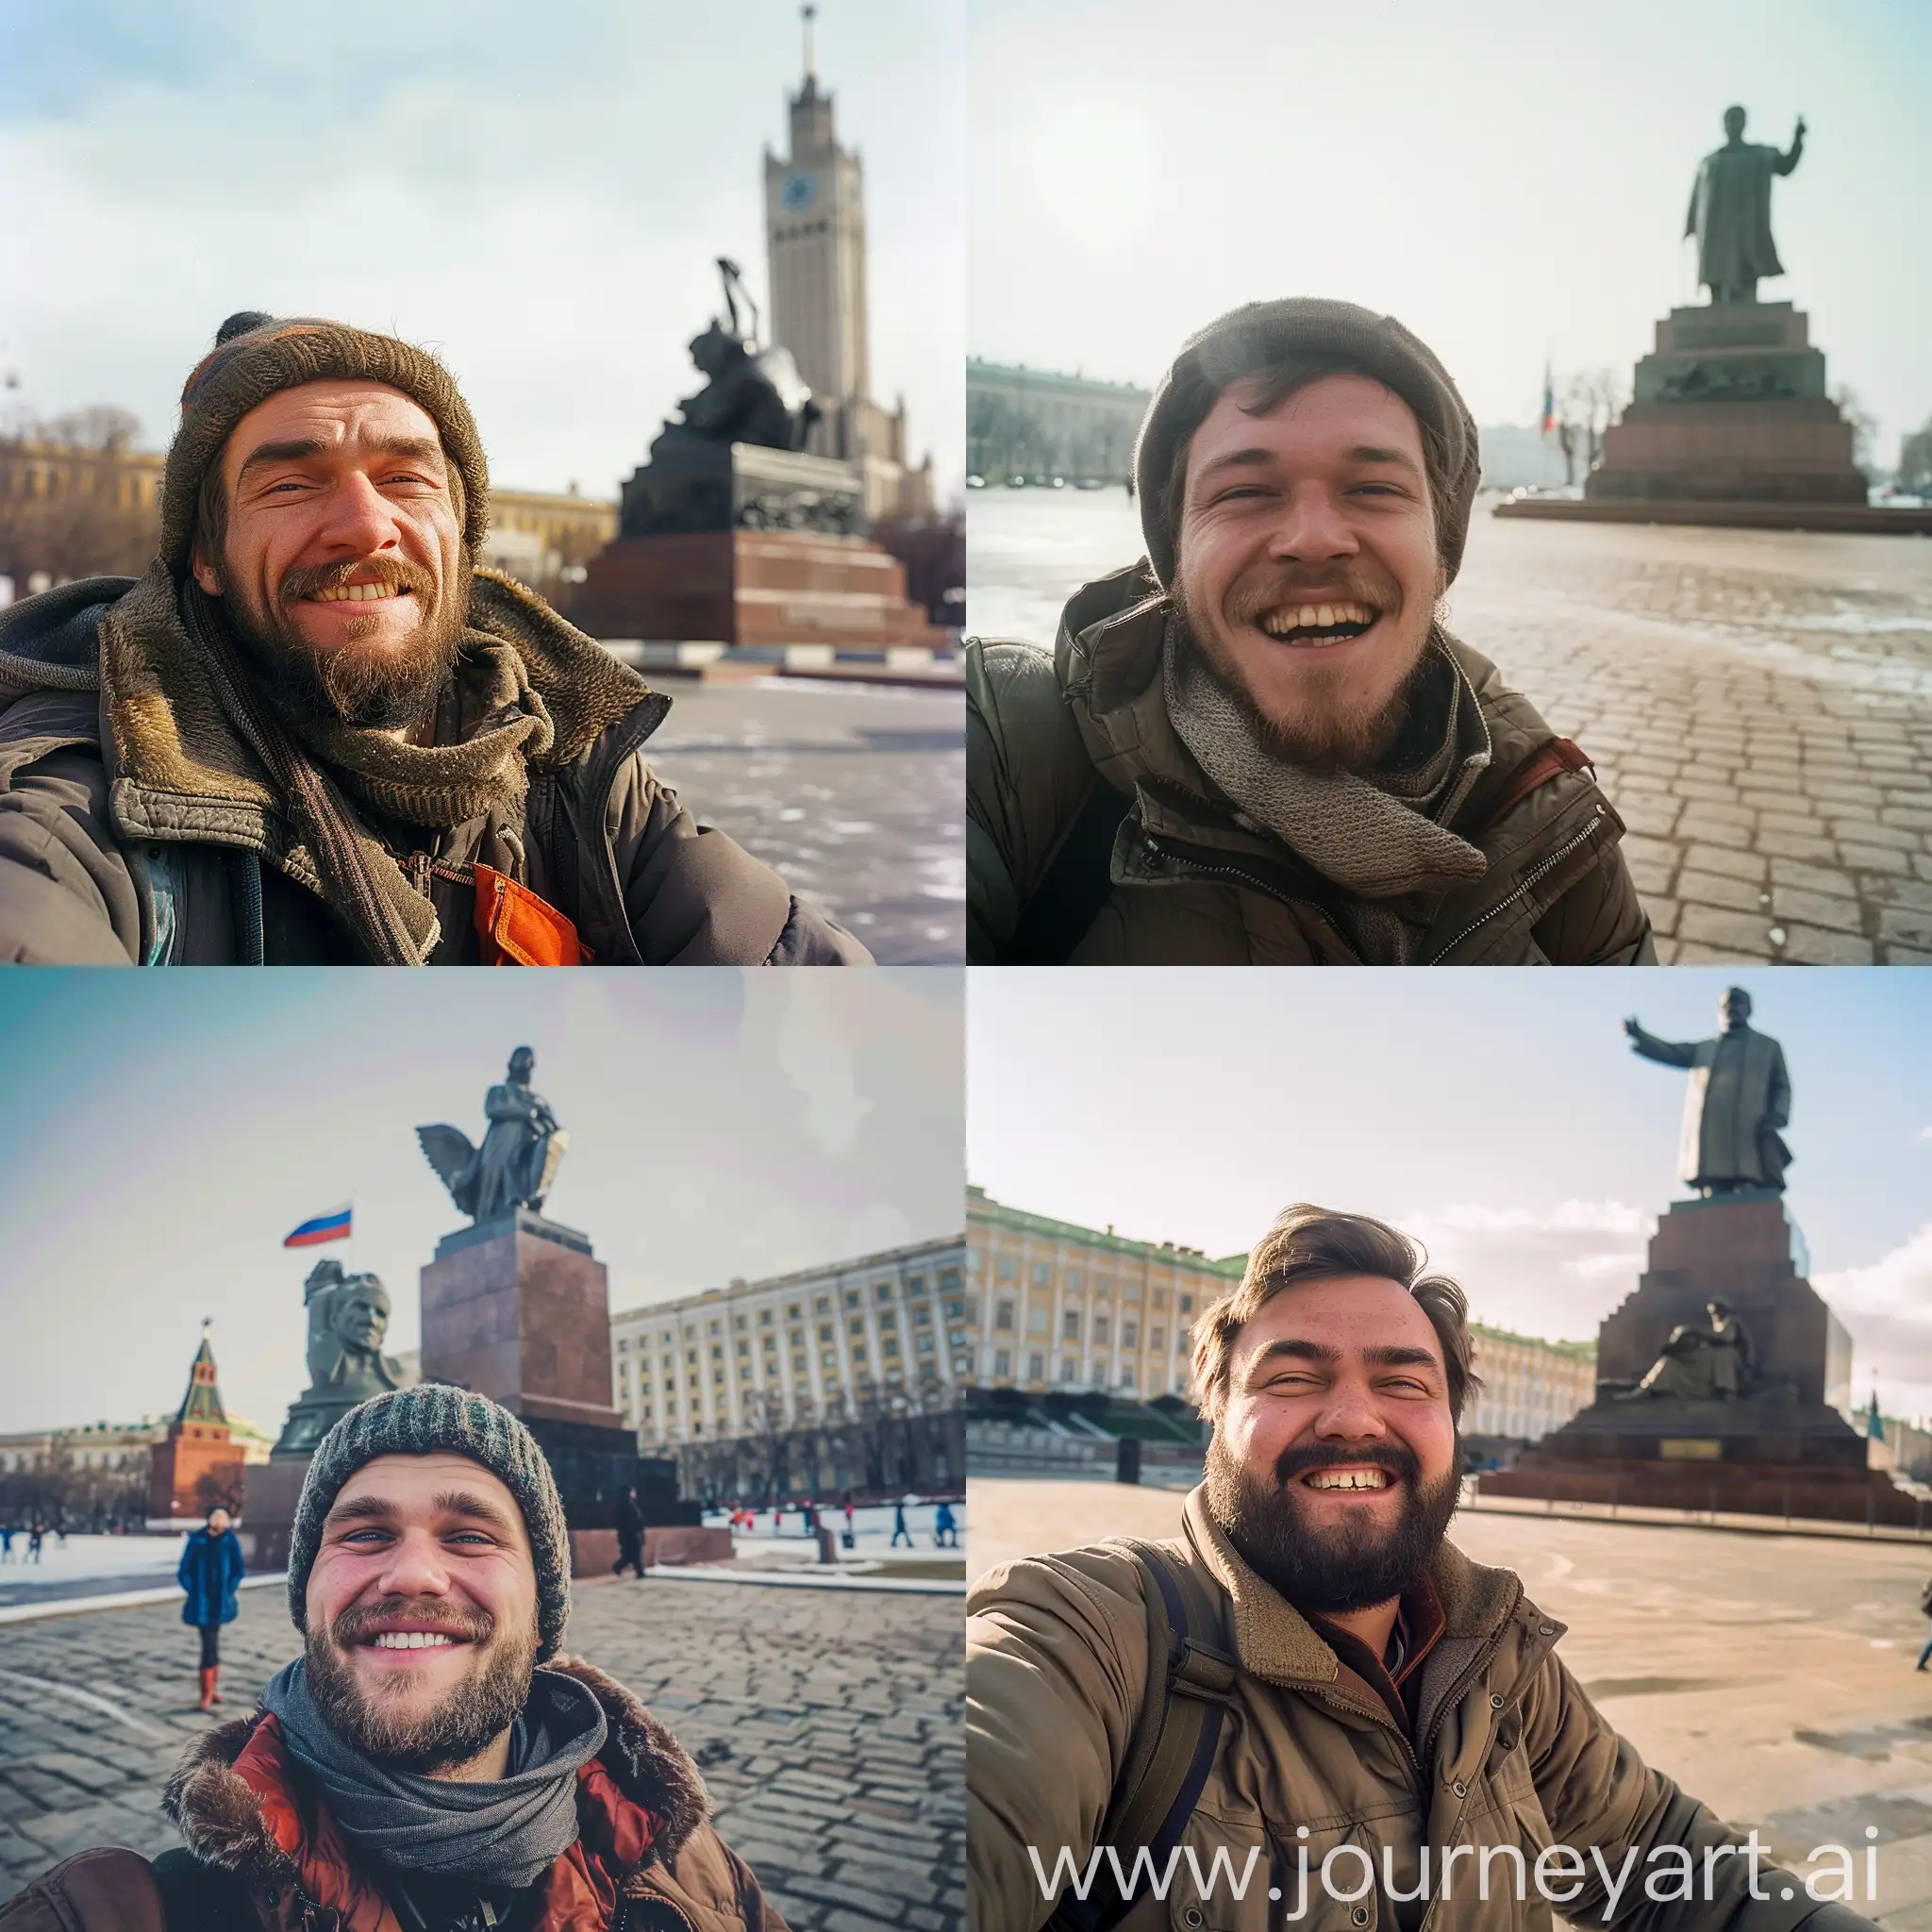 Smiling-Russian-Man-Taking-Selfie-with-Lenin-Monument-in-City-Square